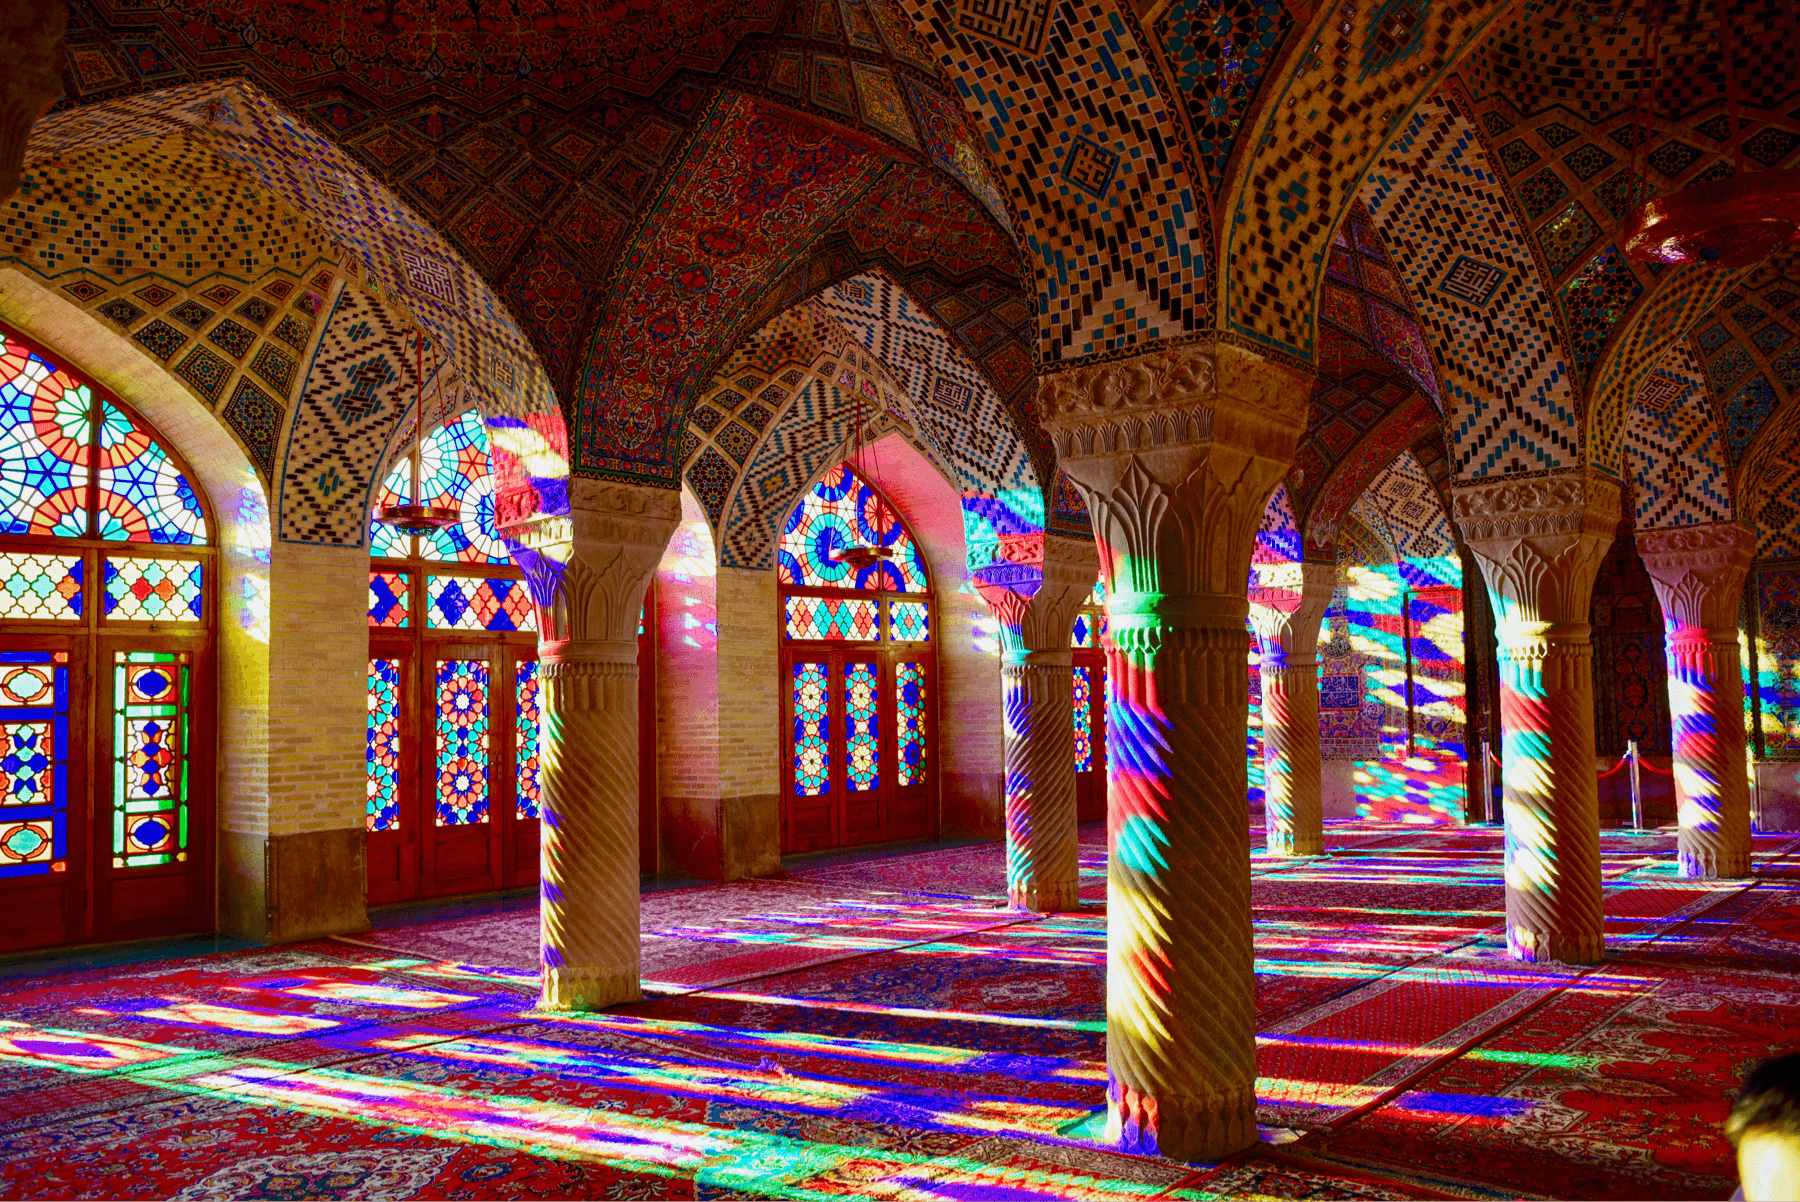 room with amazing carpets and stained glass windows